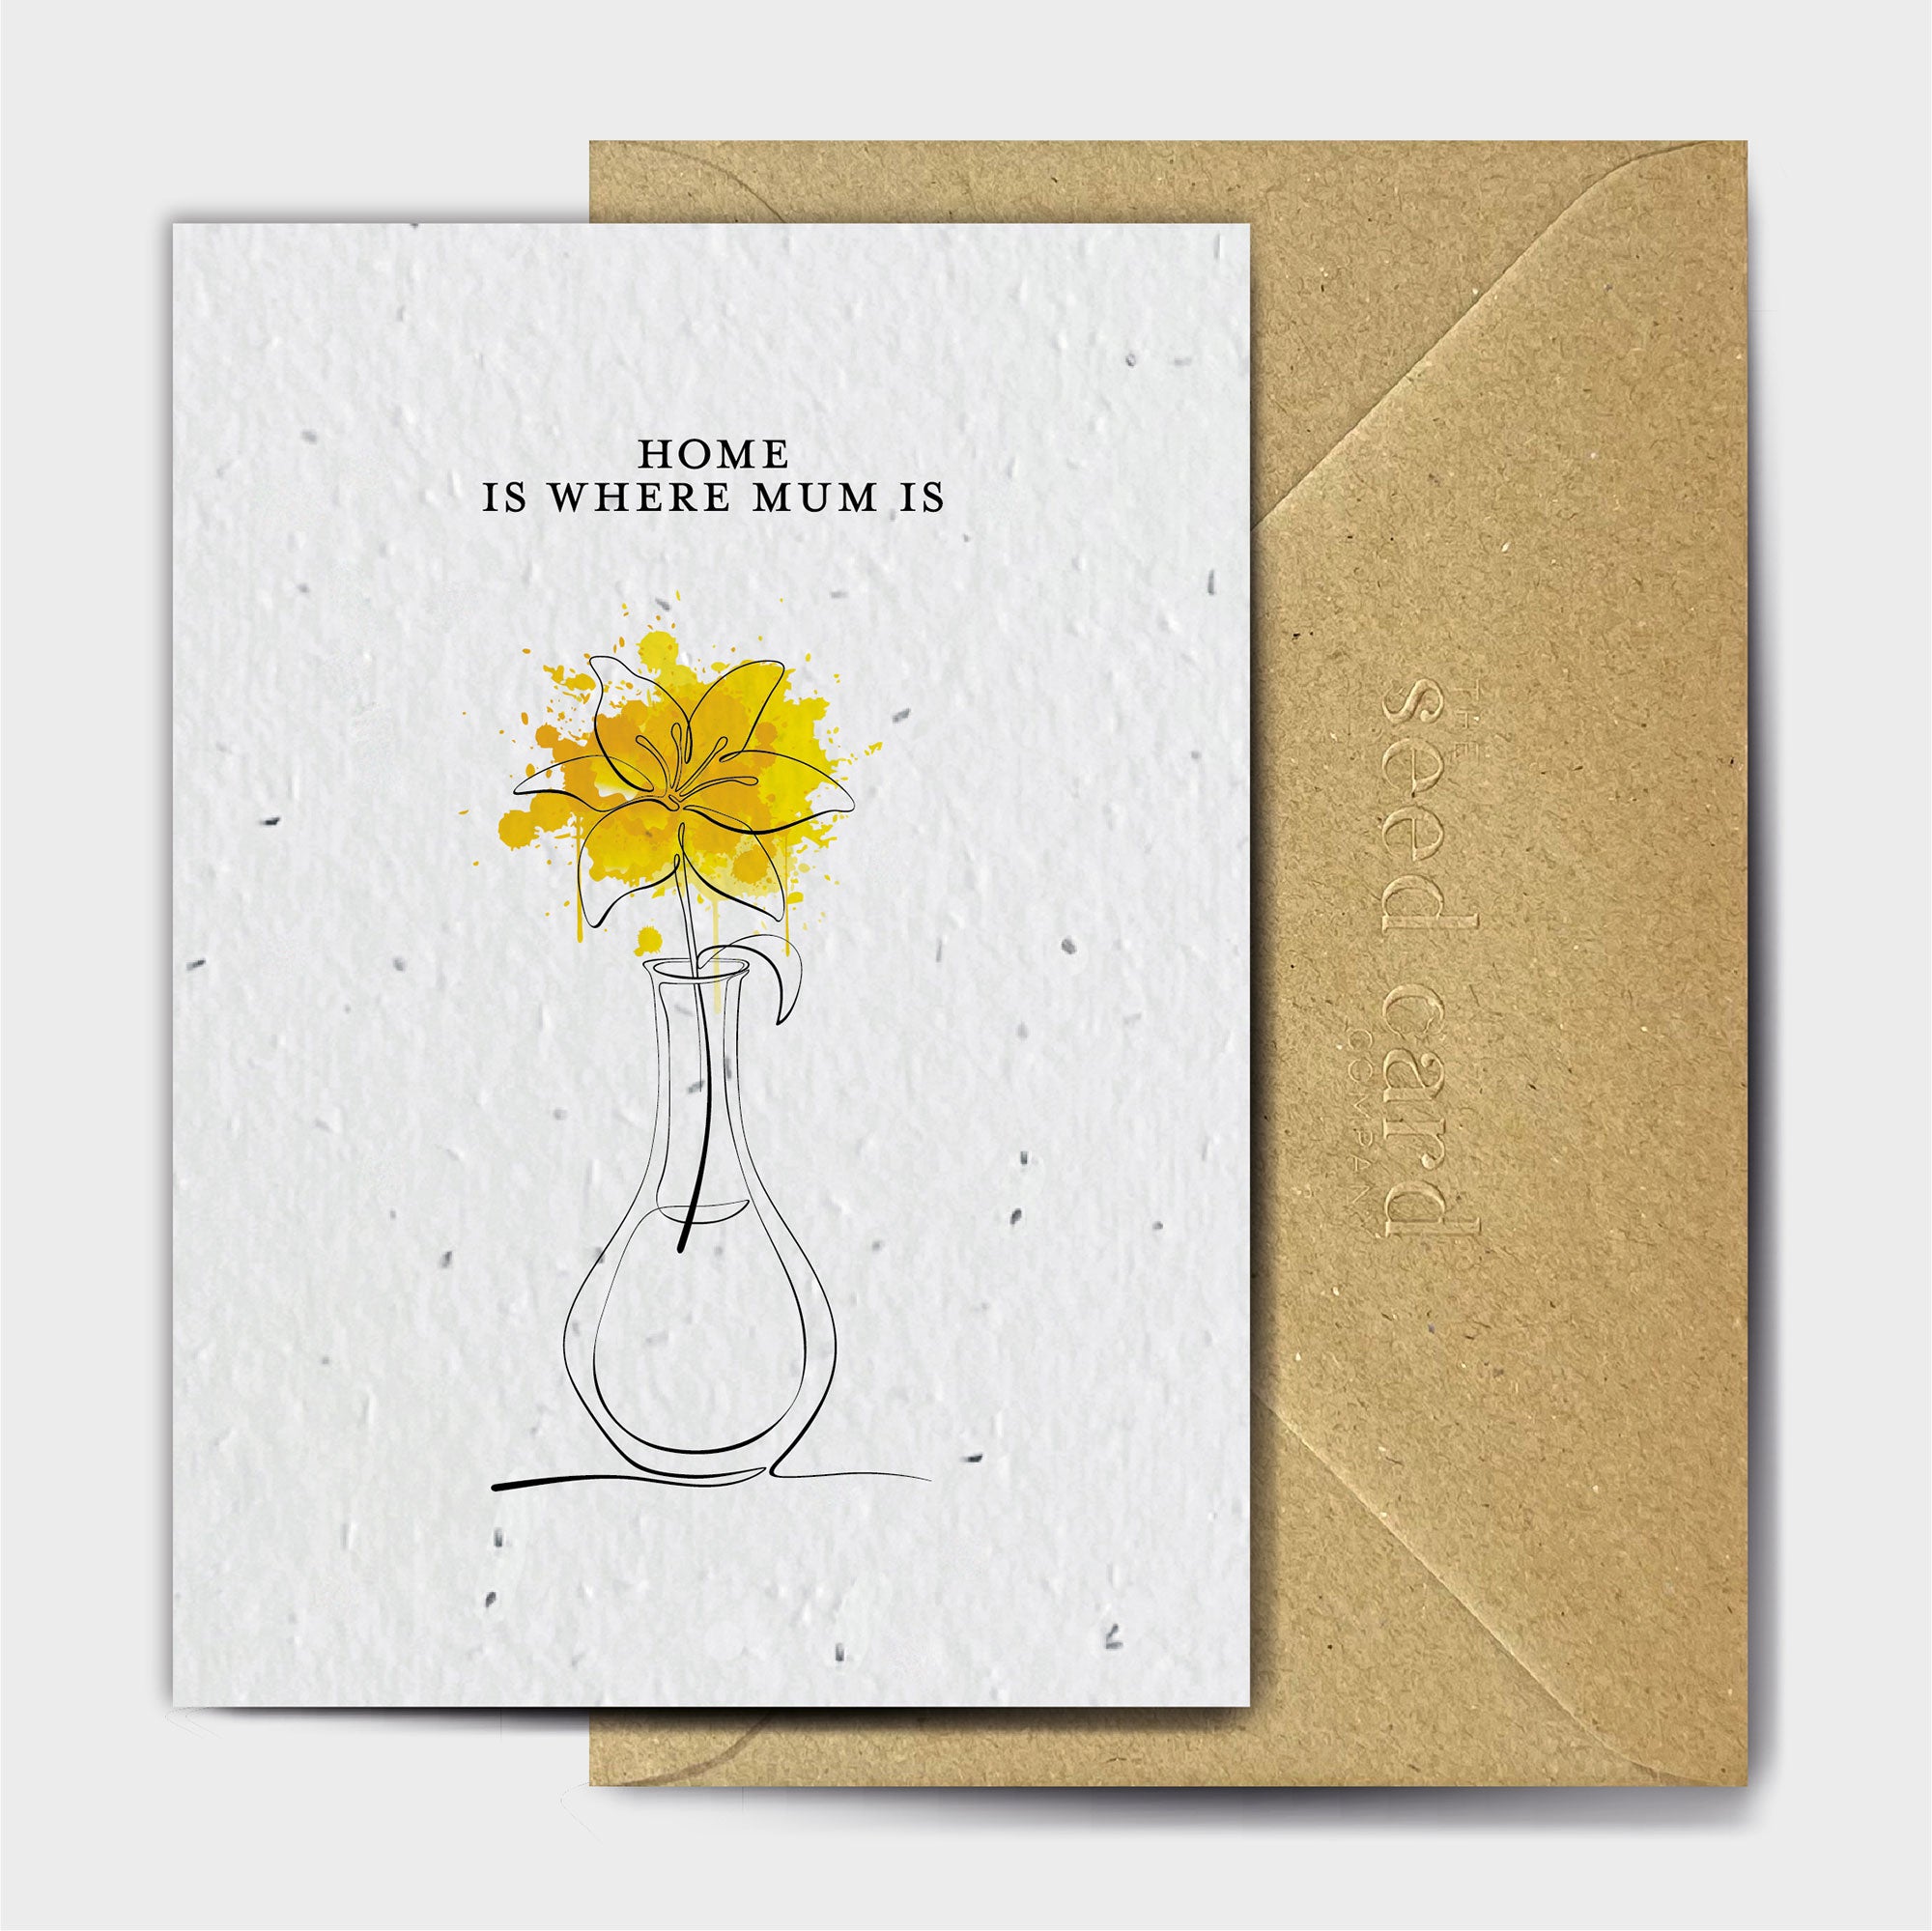 Shop online Home Is Where Mum Is - 100% biodegradable seed-embedded cards Shop -The Seed Card Company